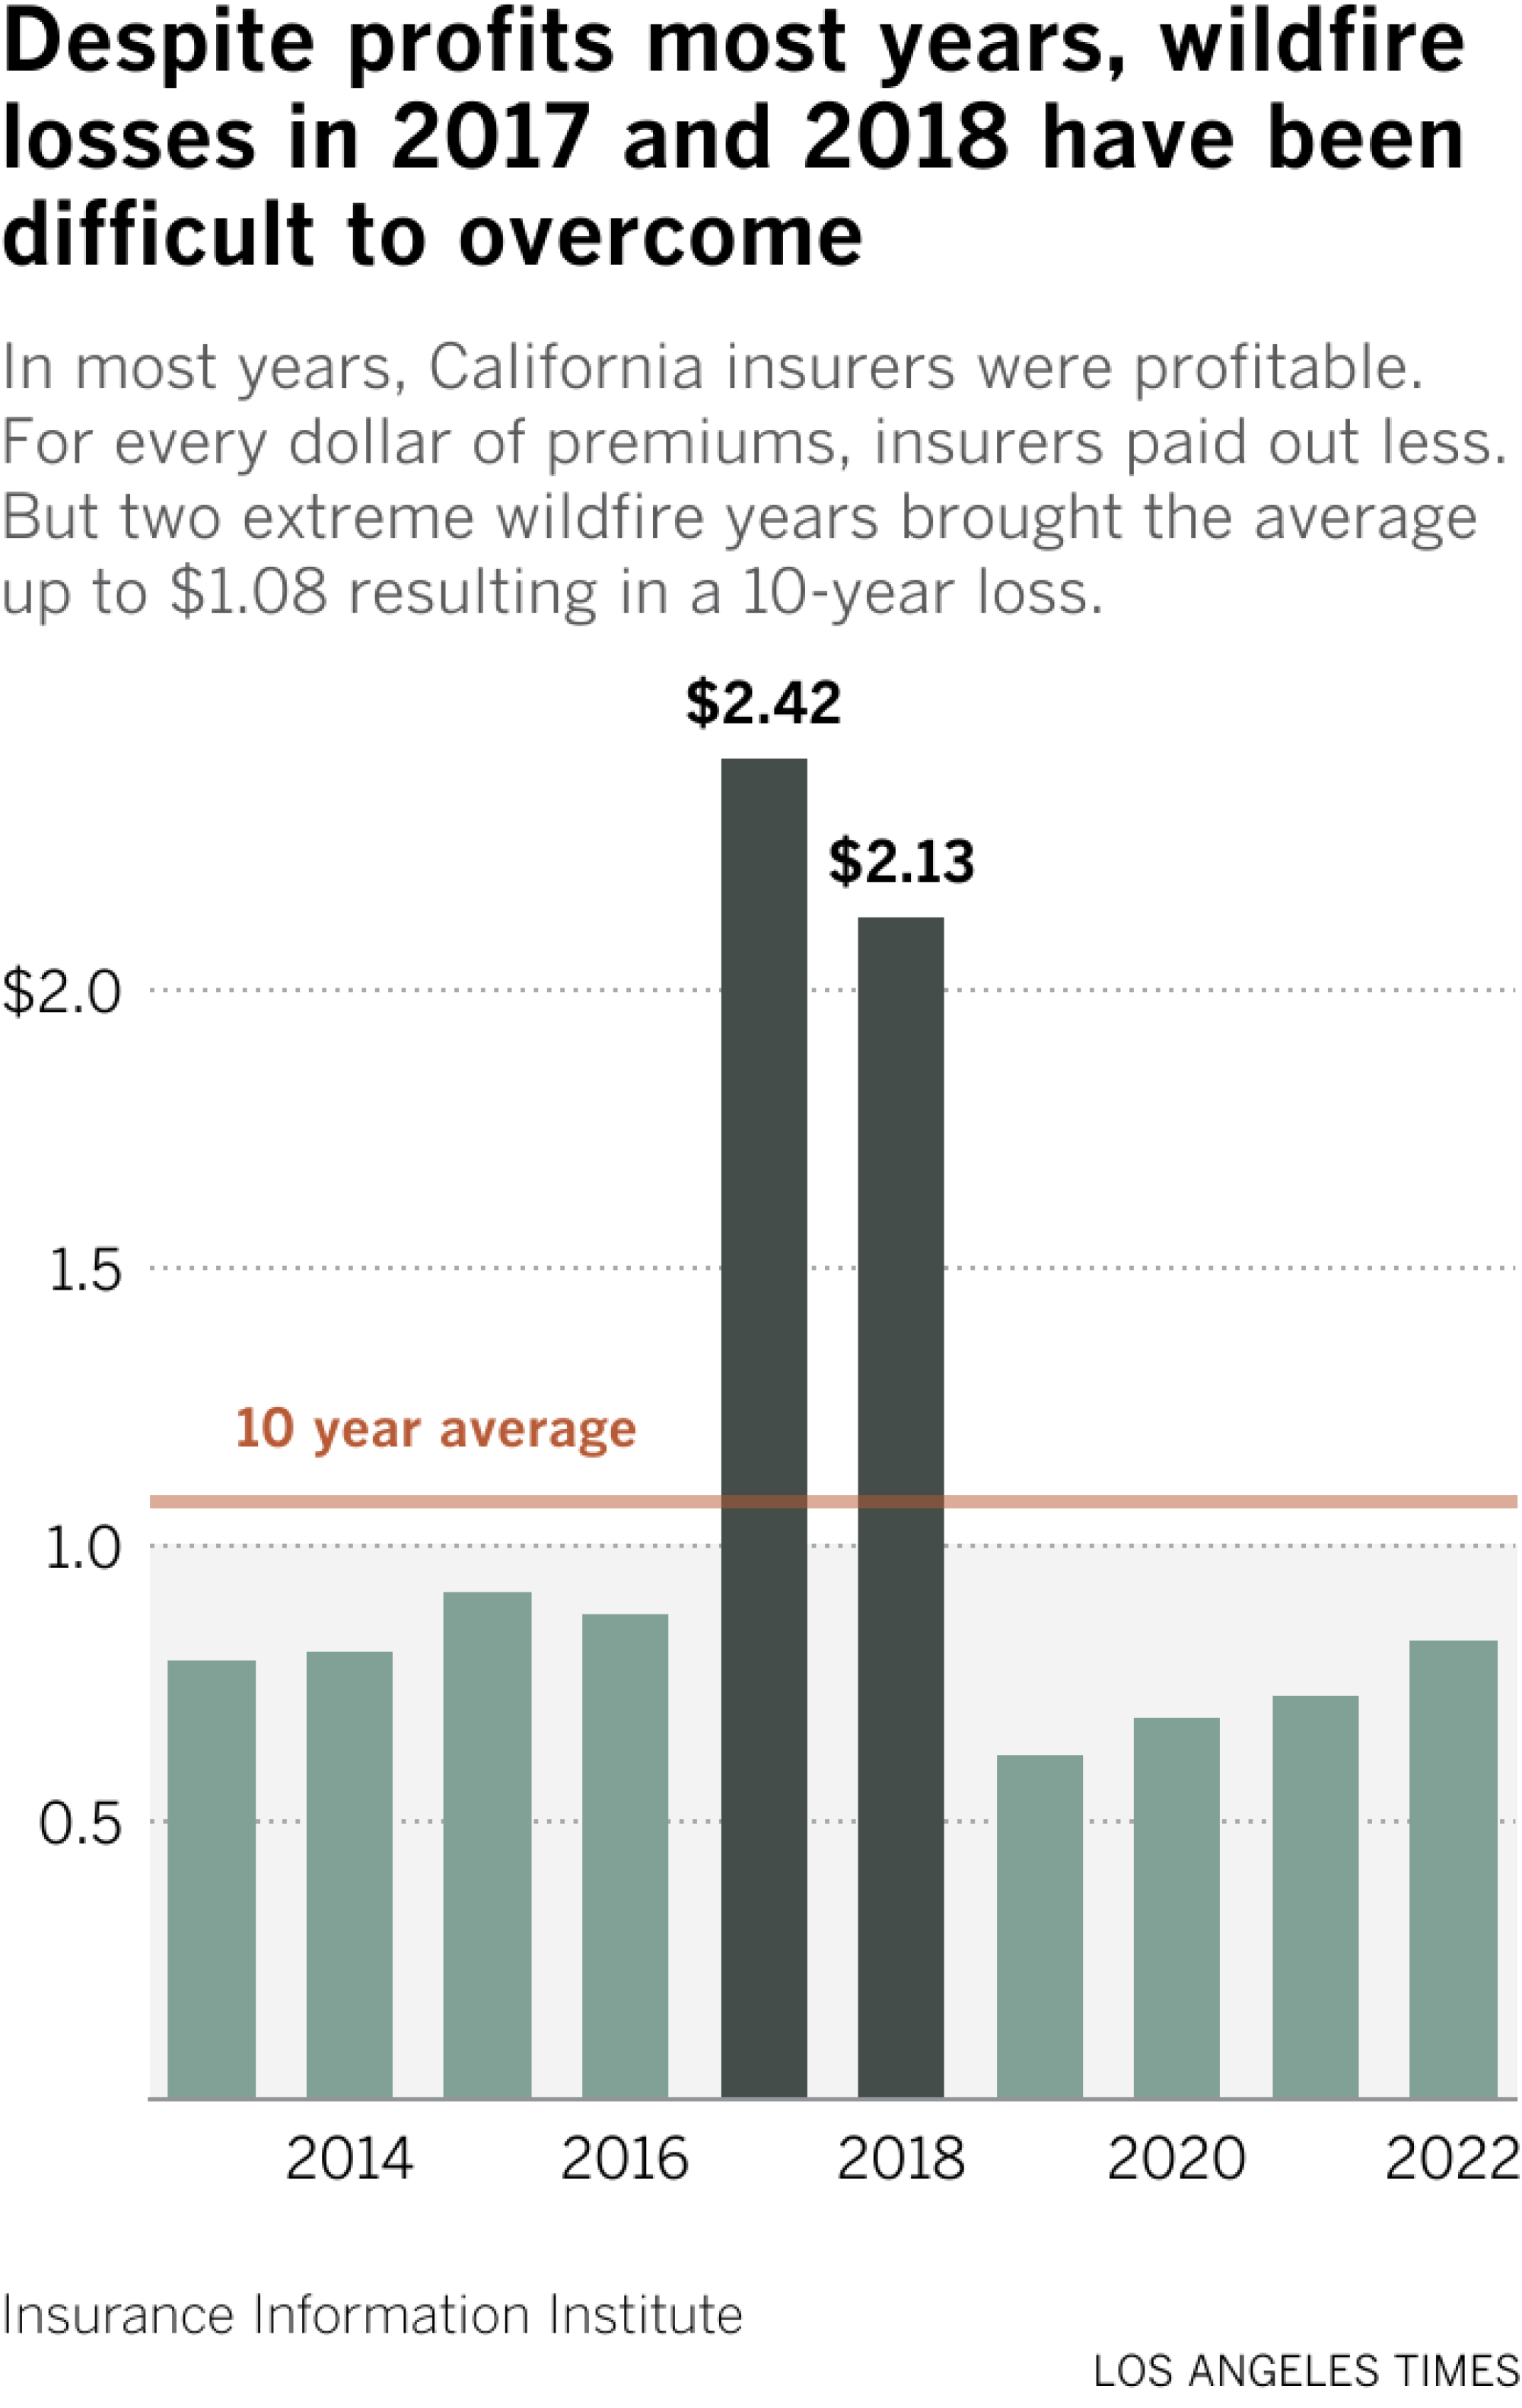 In most years, California insurers were profitable. For every dollar of premiums, insurers paid out less. But two extreme wildfire years brought the average up to $1.08 resulting in a 10-year loss.